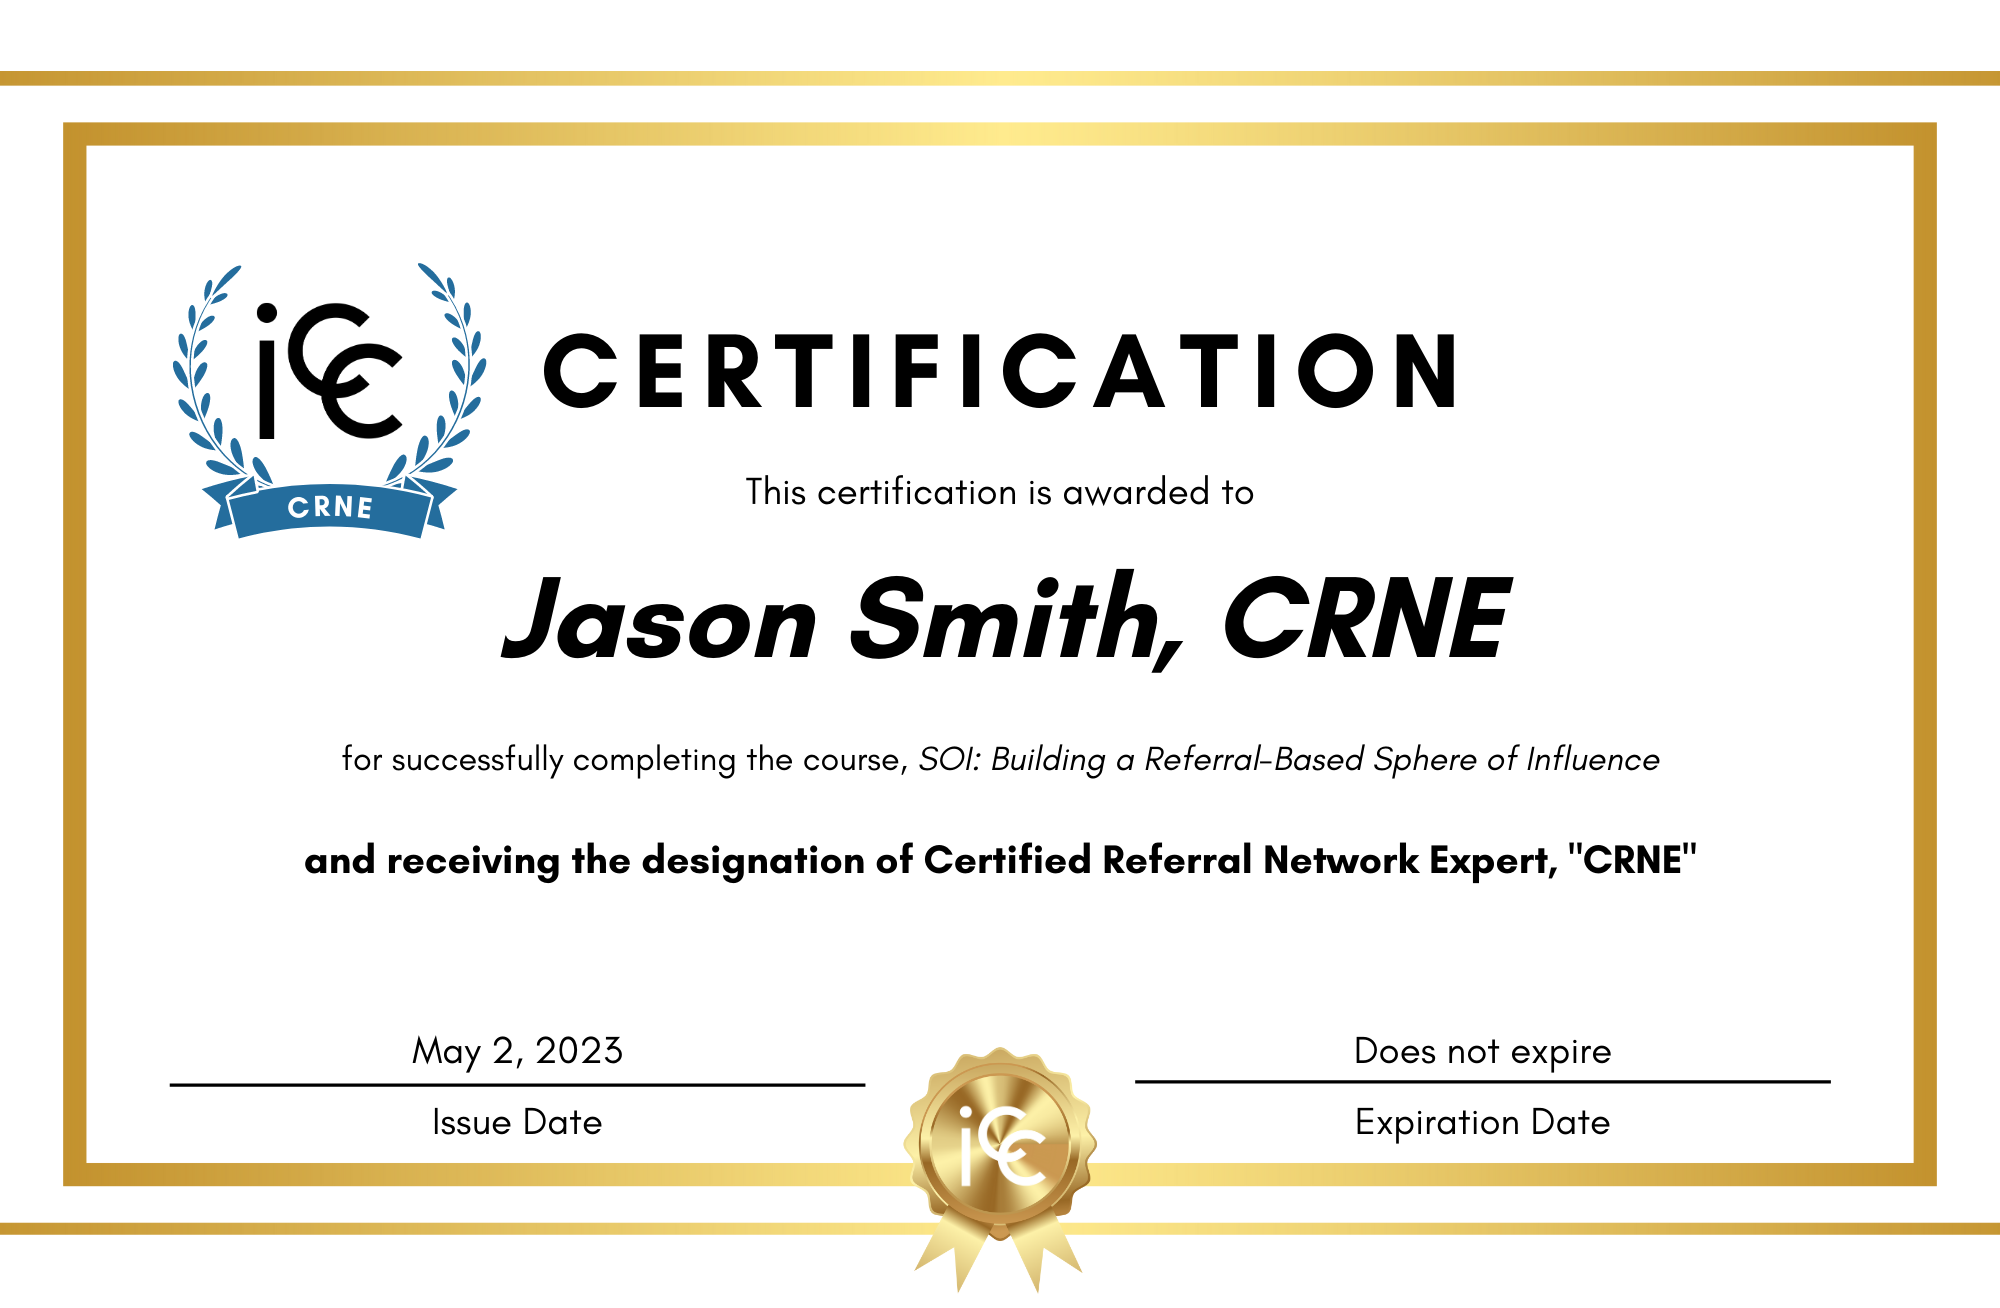 SOI - Building a Referral-Based Sphere of Influence - Certified Referral Network Expert “CRNE”